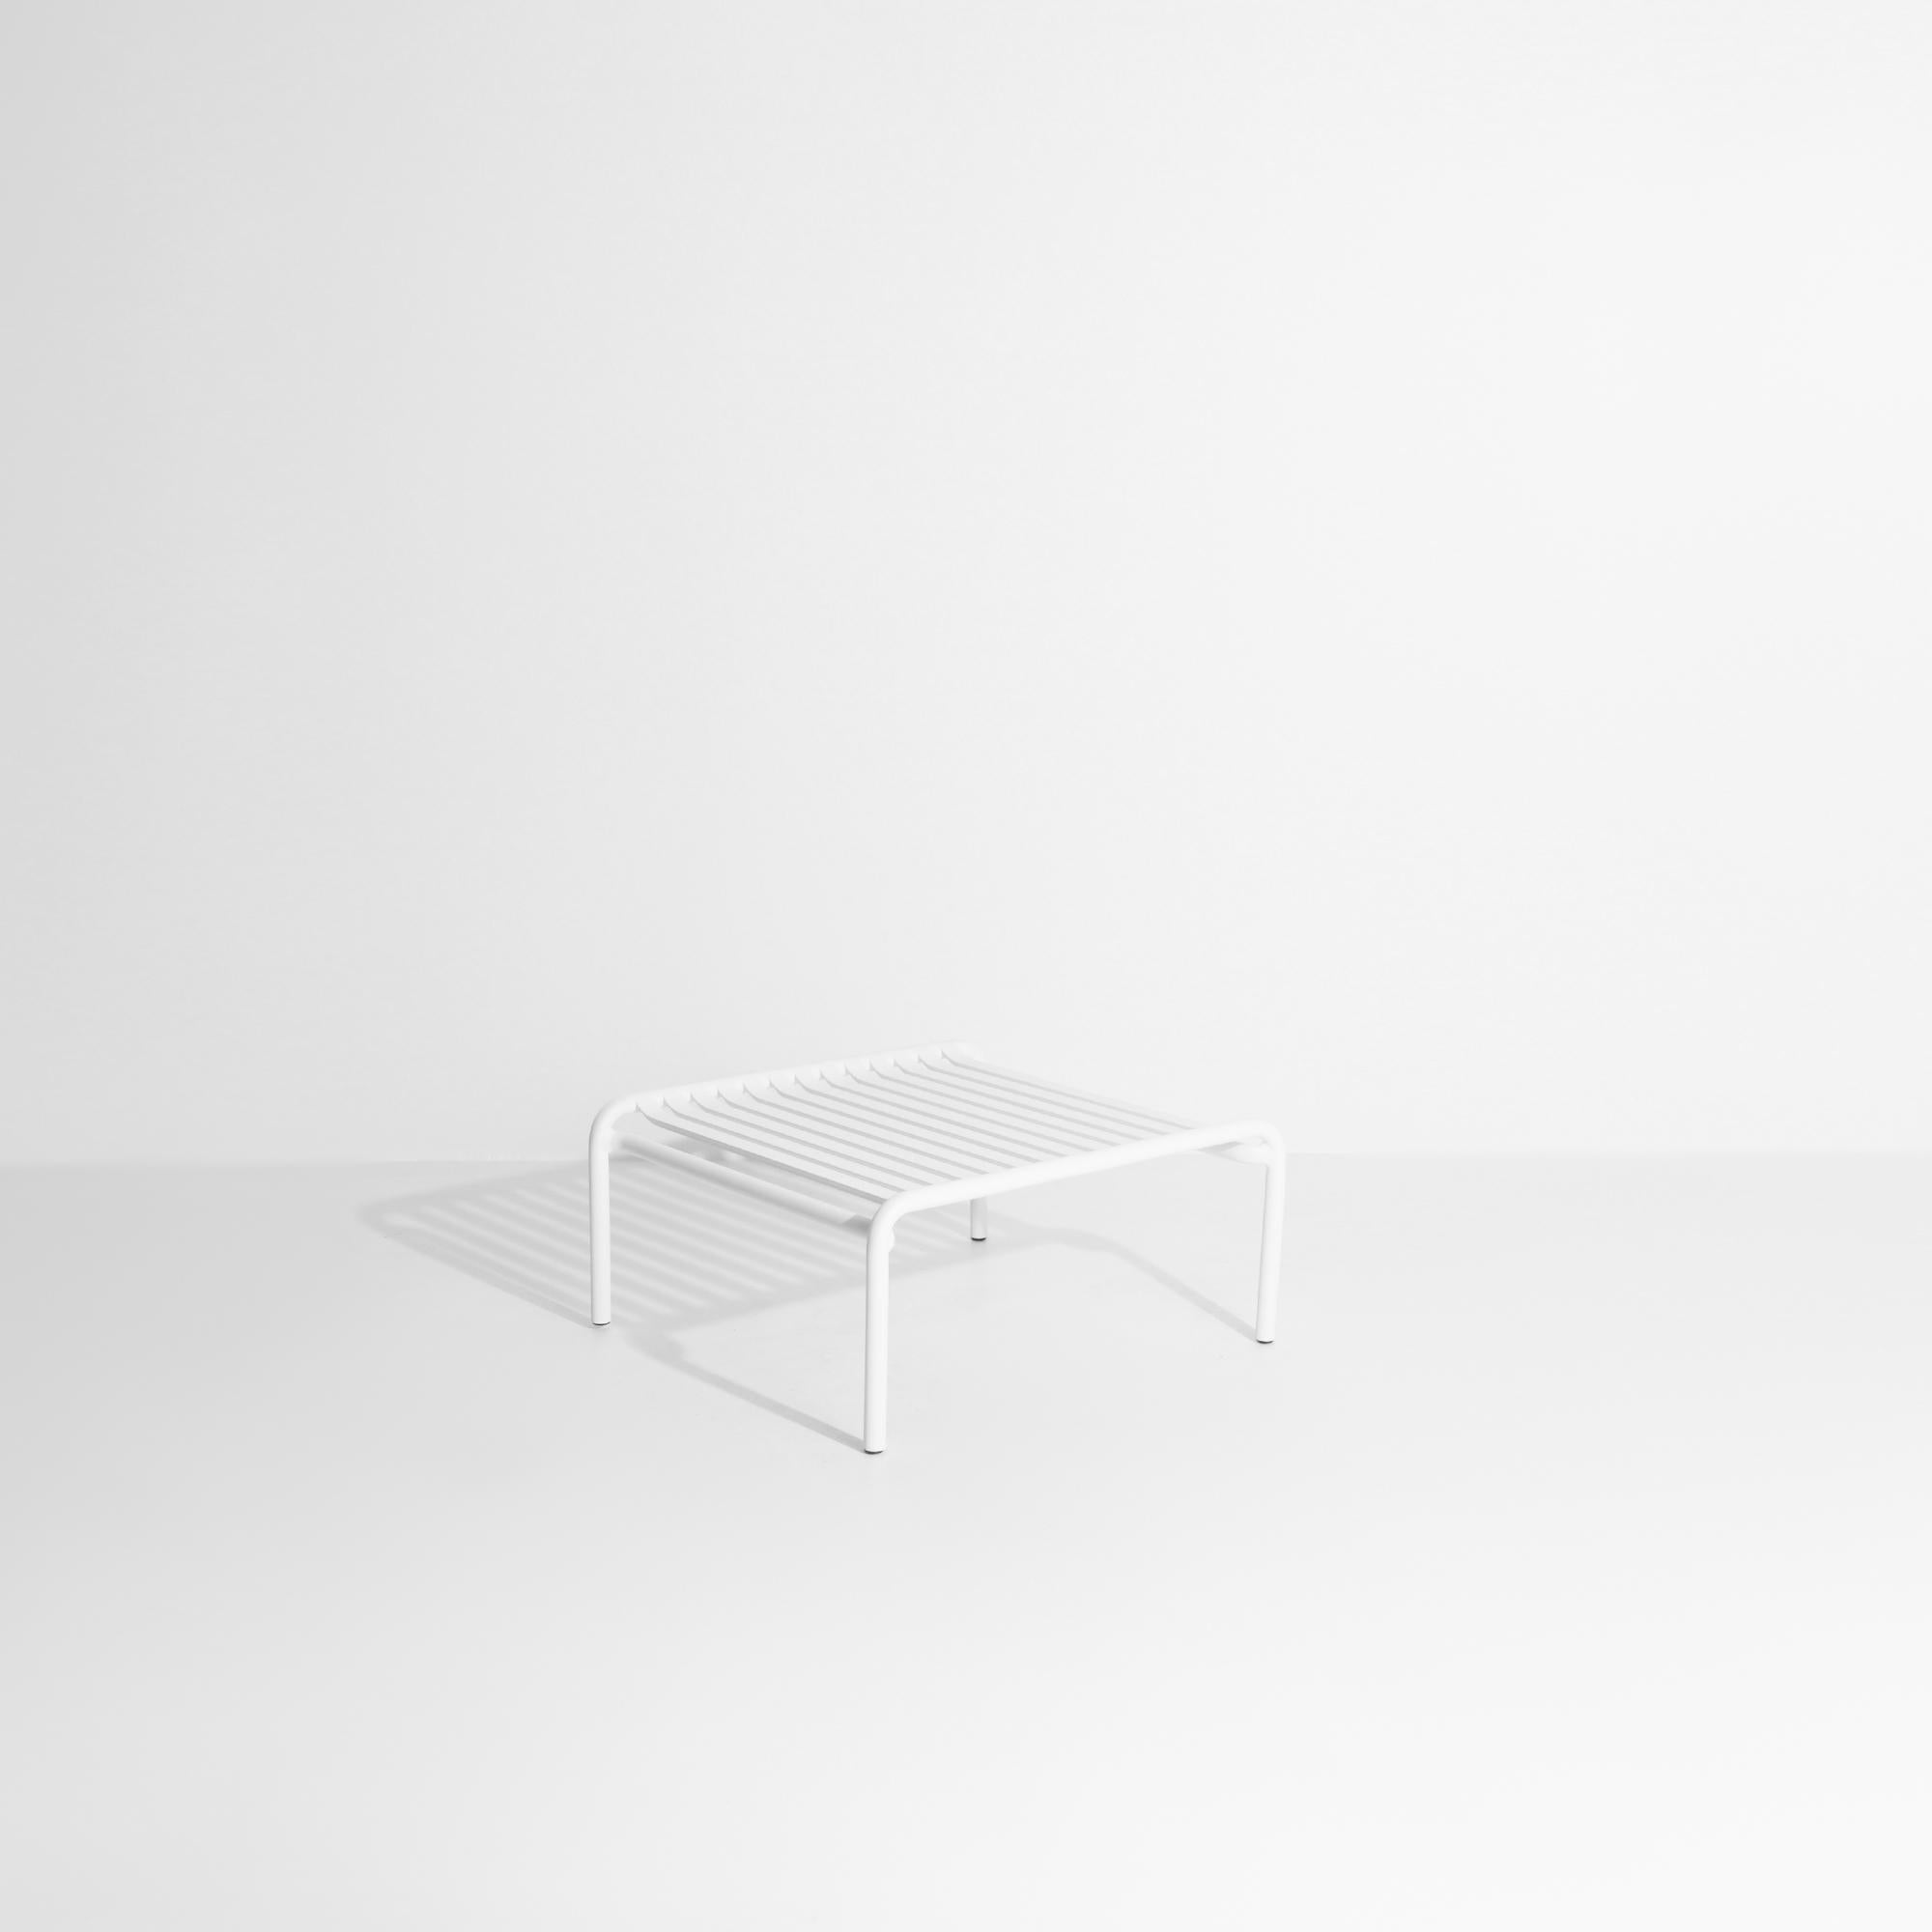 Petite Friture Week-End Coffee Table in White Aluminium by Studio BrichetZiegler In New Condition For Sale In Brooklyn, NY